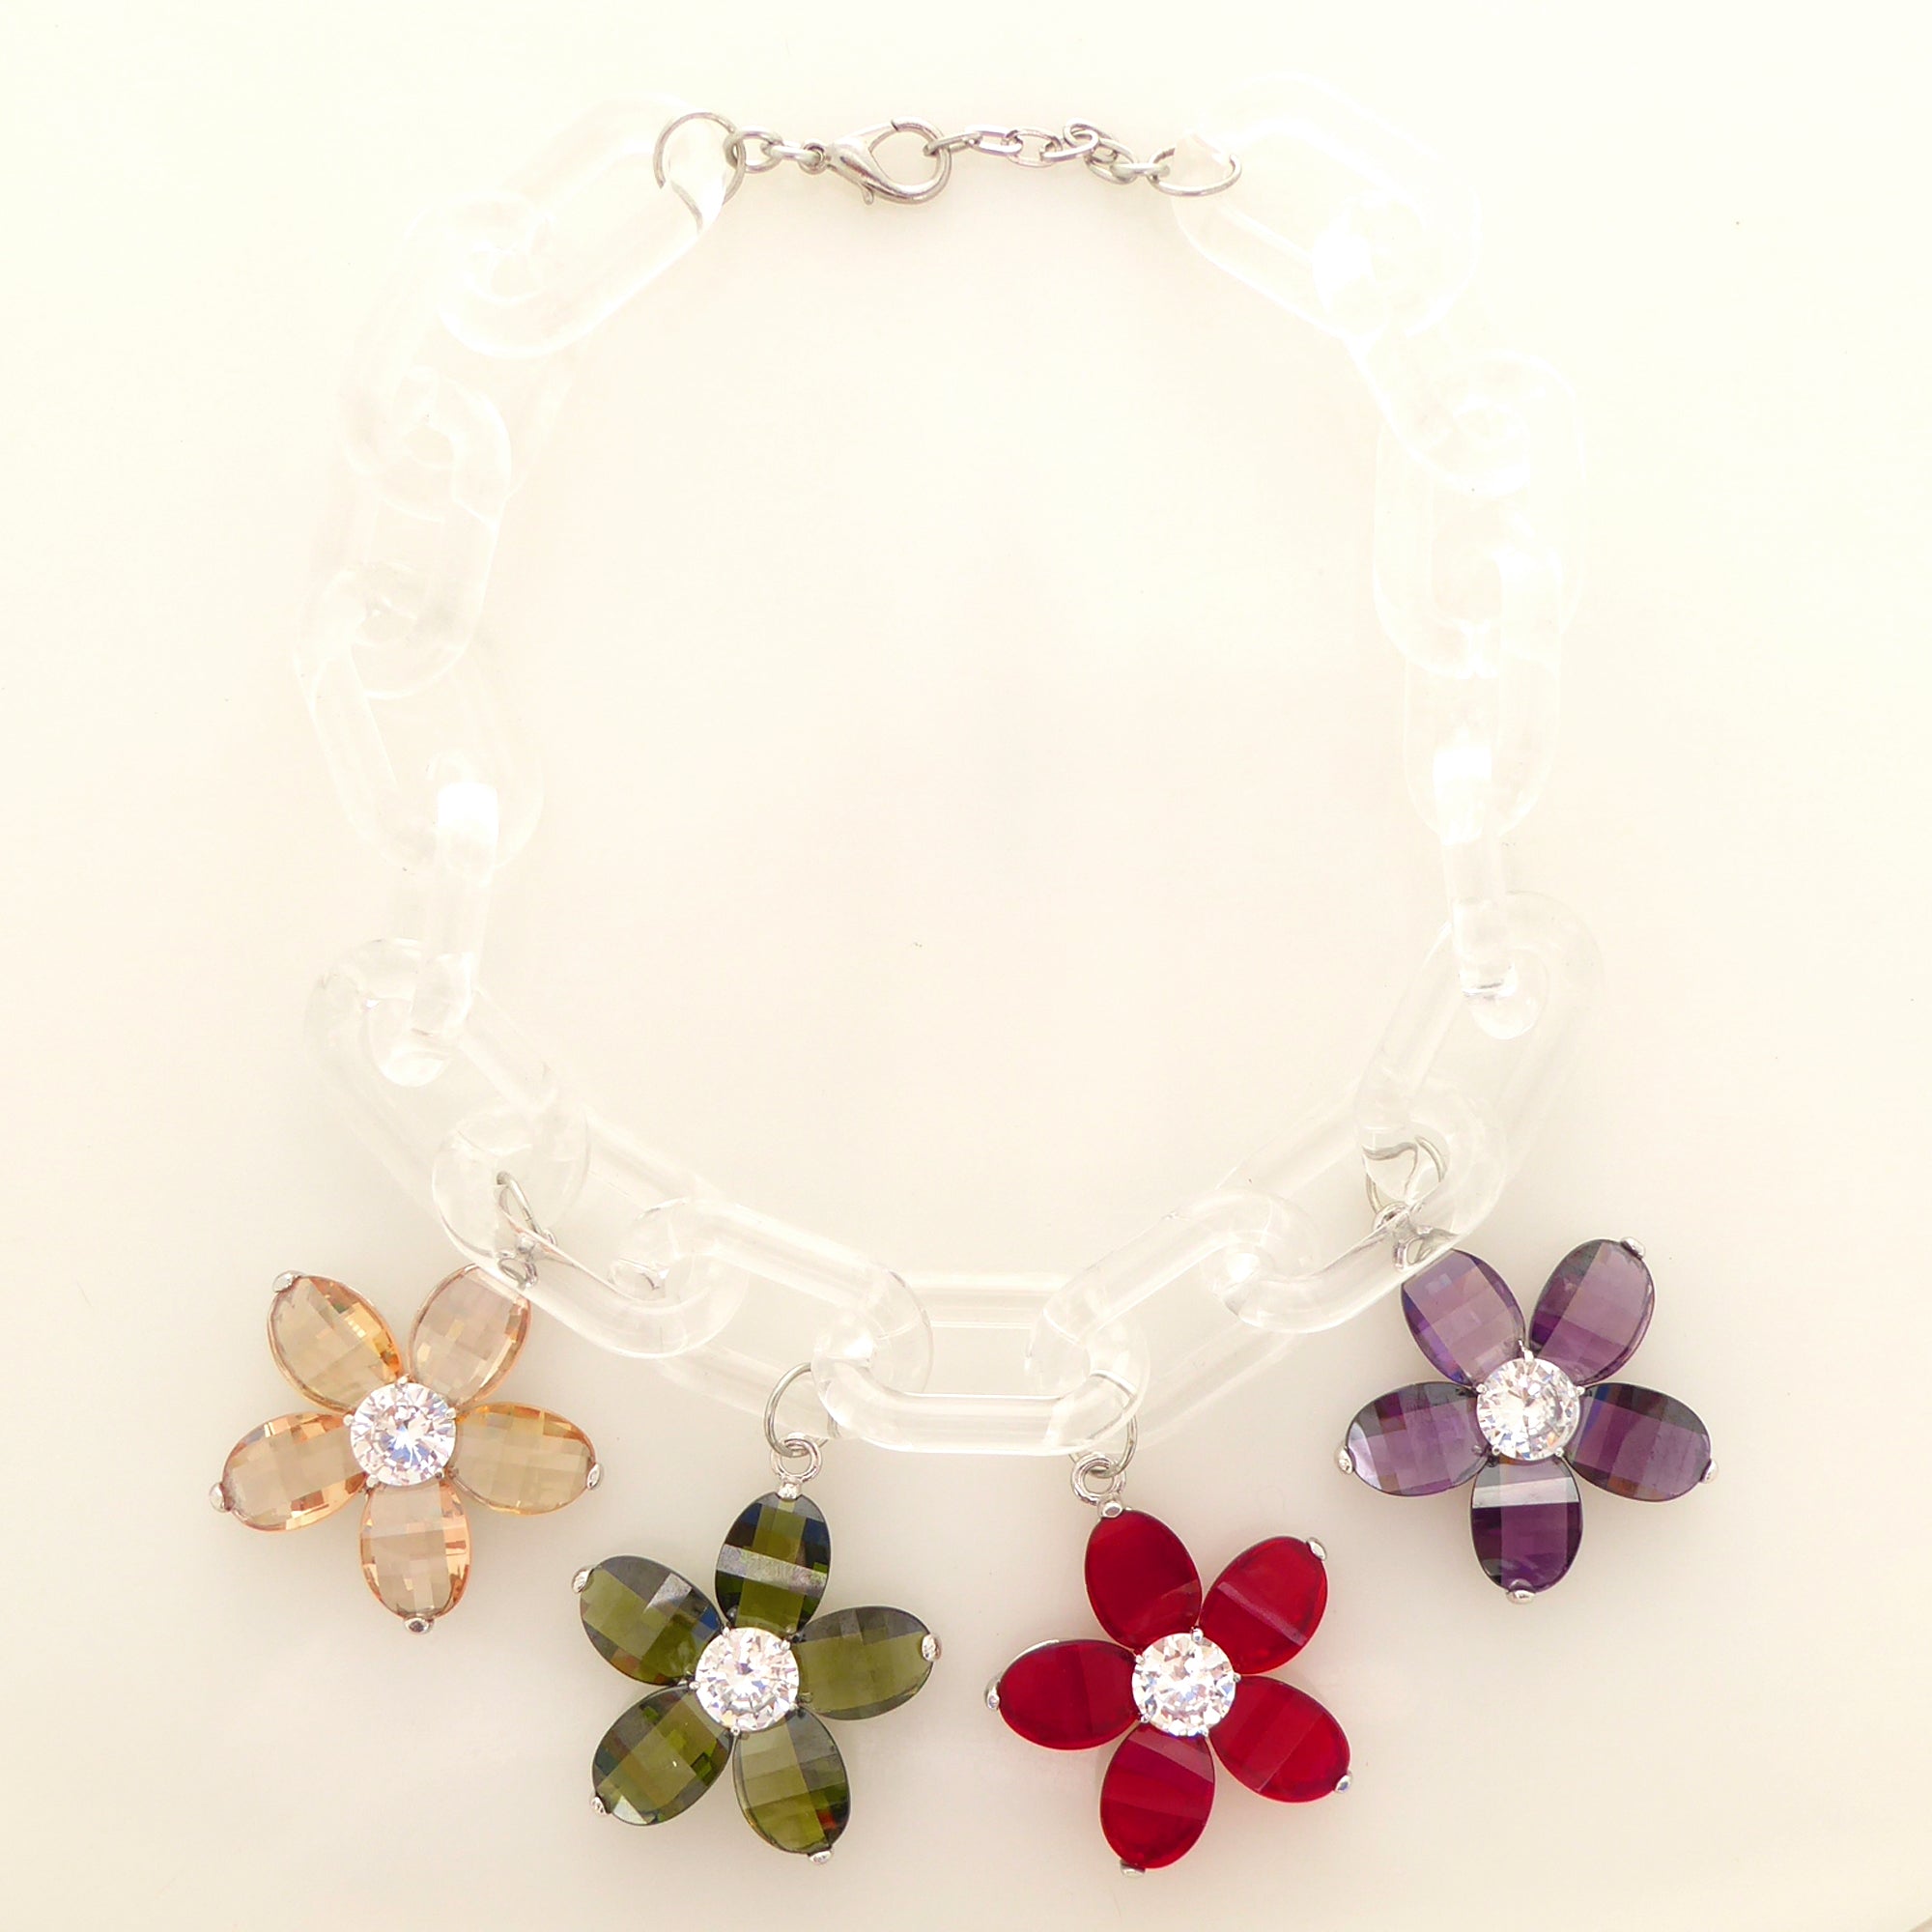 Printemps colorful floral clear chain necklace by Jenny Dayco 6